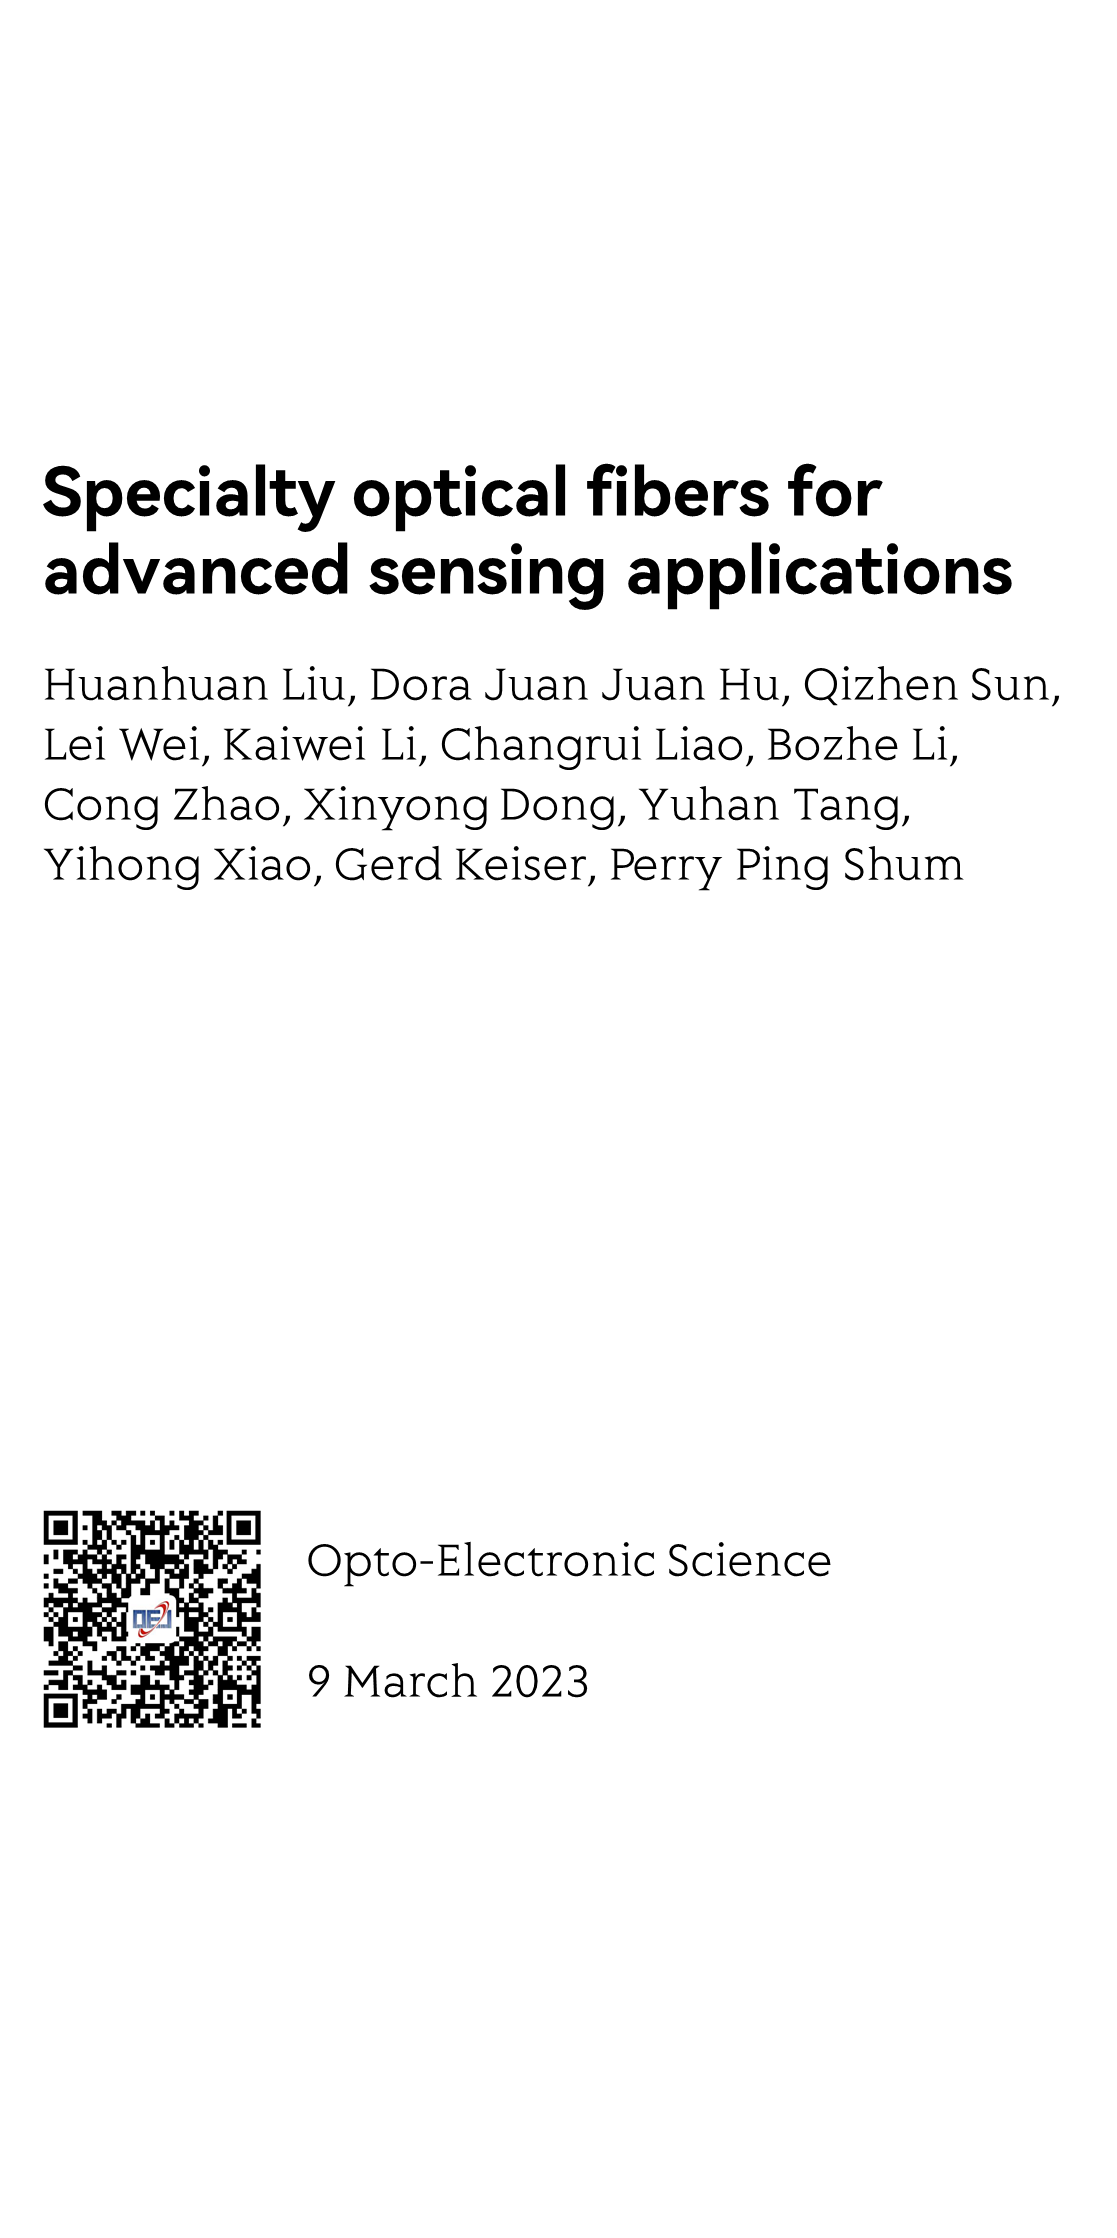 Specialty optical fibers for advanced sensing applications_1